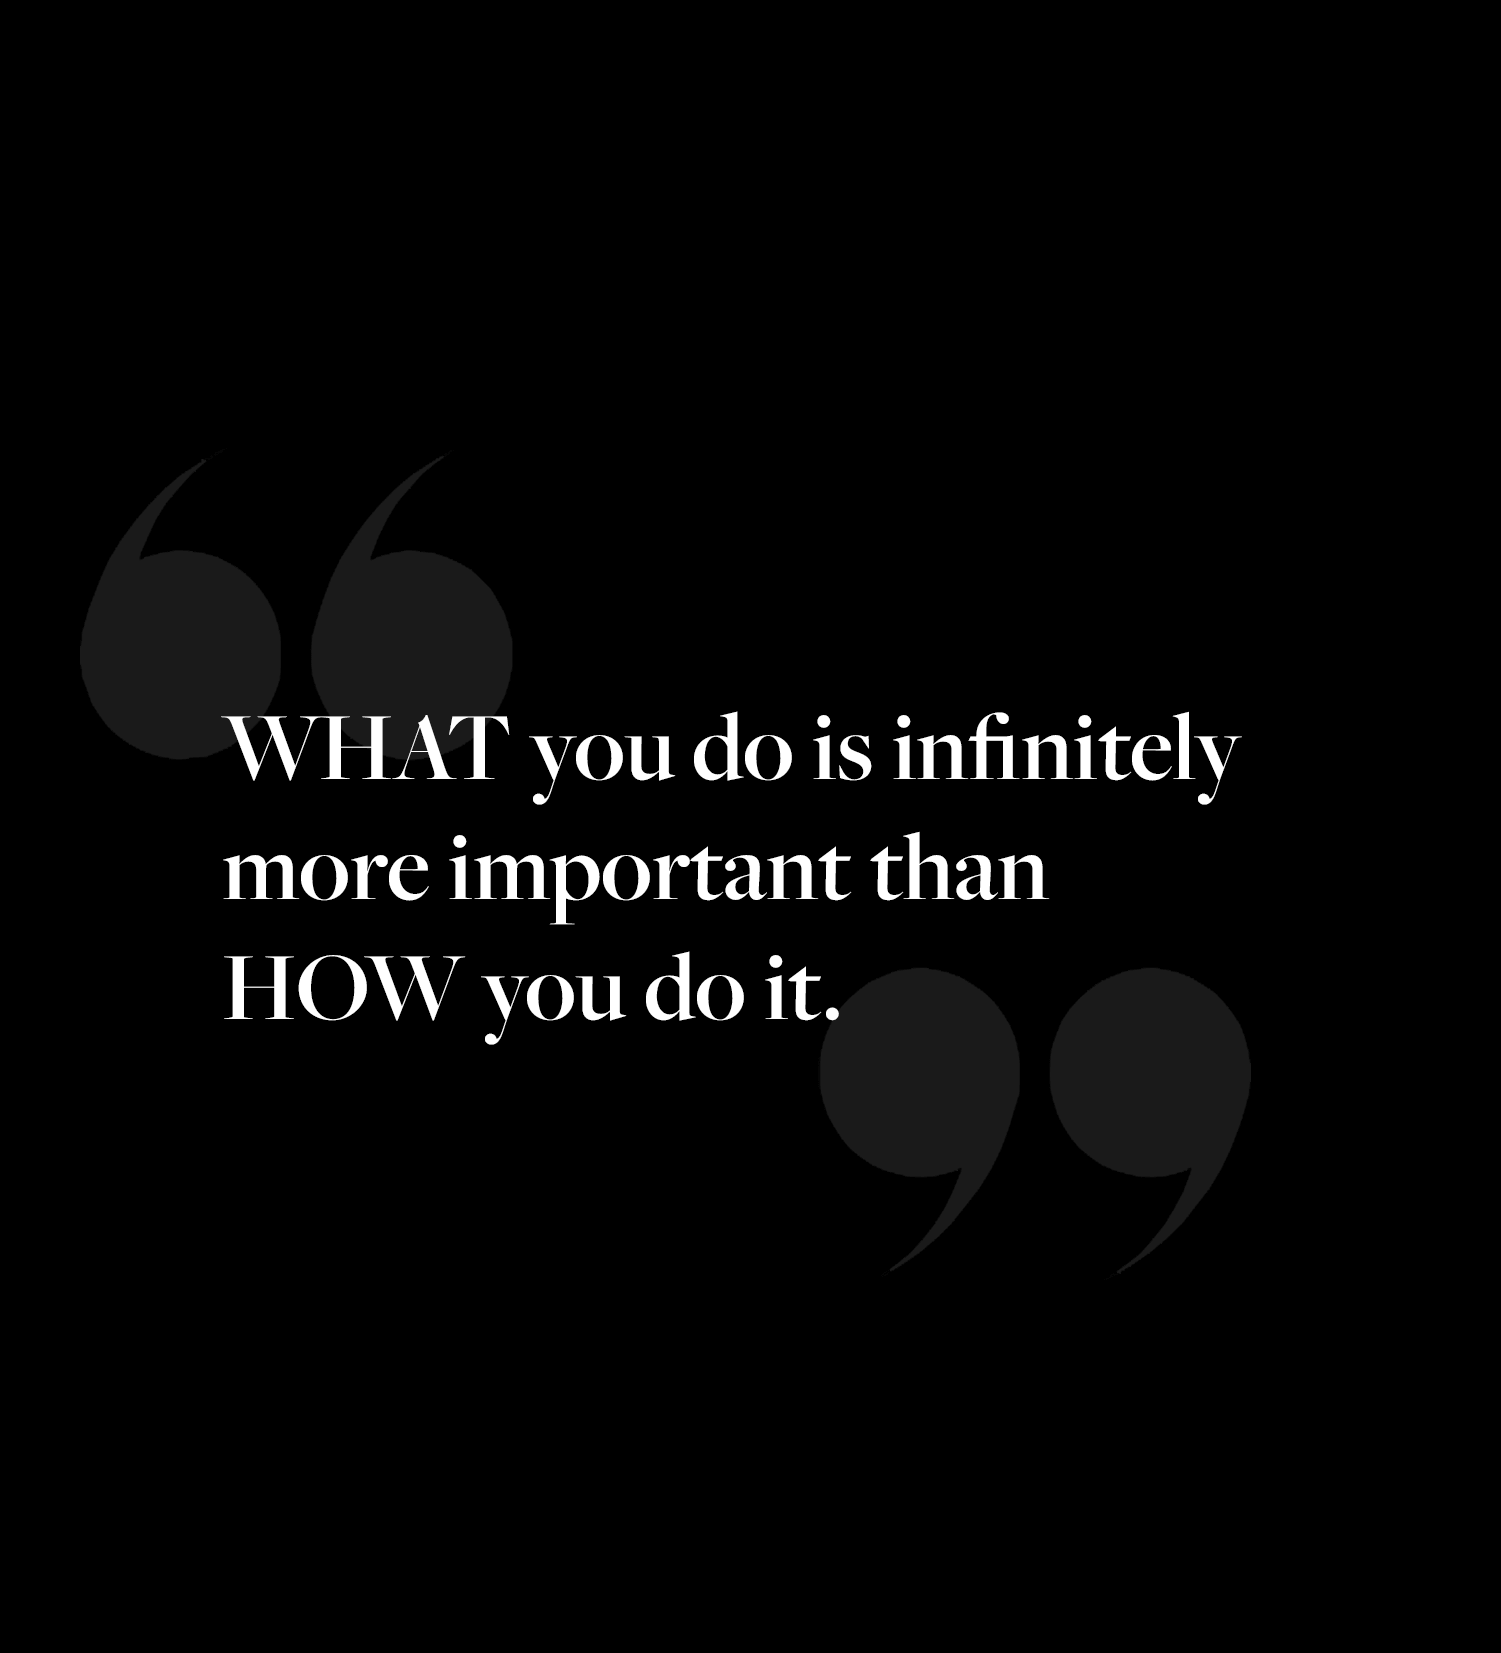 what you do is infinitely more important than how you do it